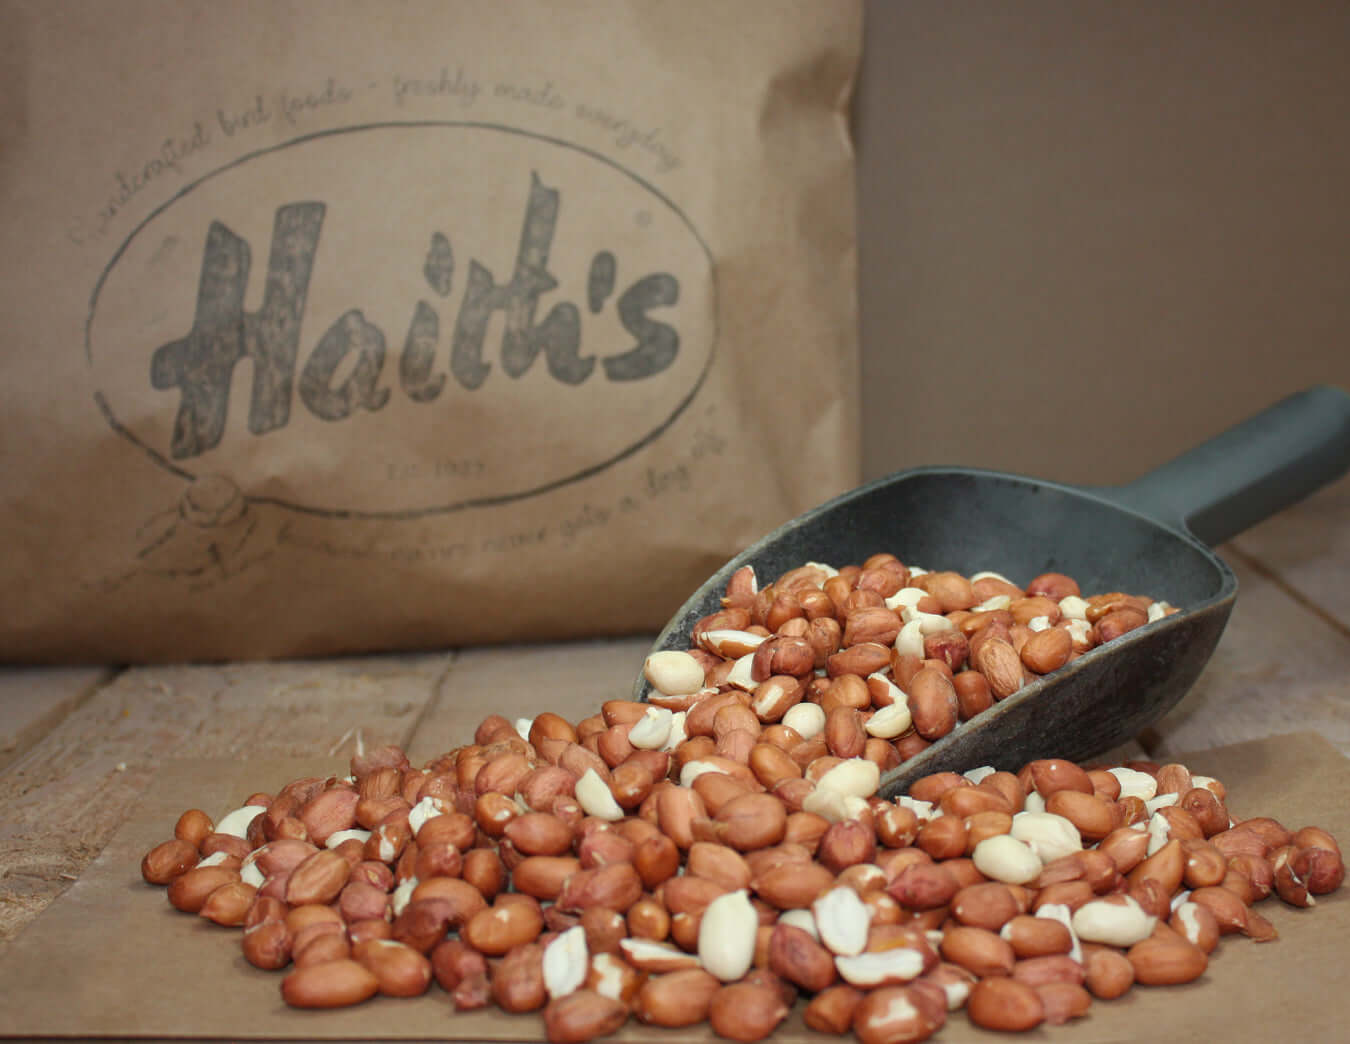 Premium Peanuts on a scoop Premium Peanuts from Haith's, in paper sacks up to 20 kg or buy in bulk